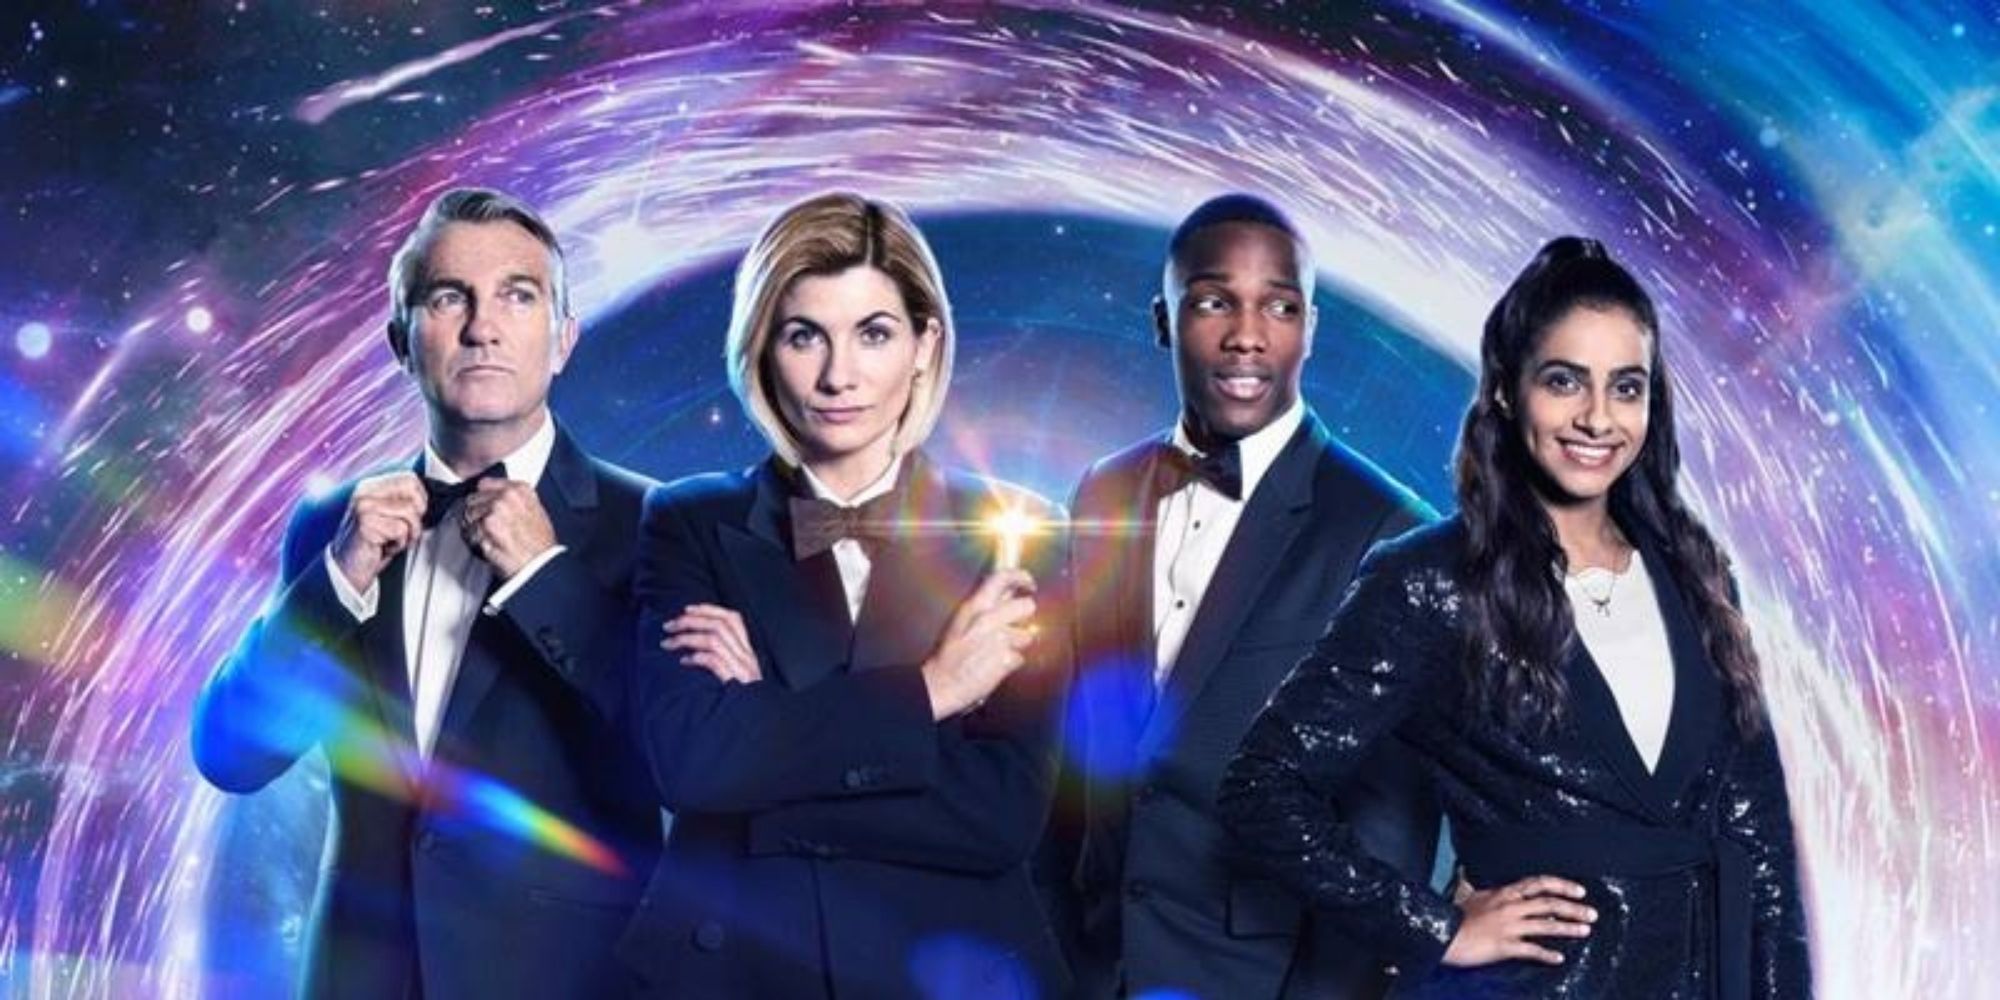 Official promotional image of Series 12 of the TV show Doctor Who.